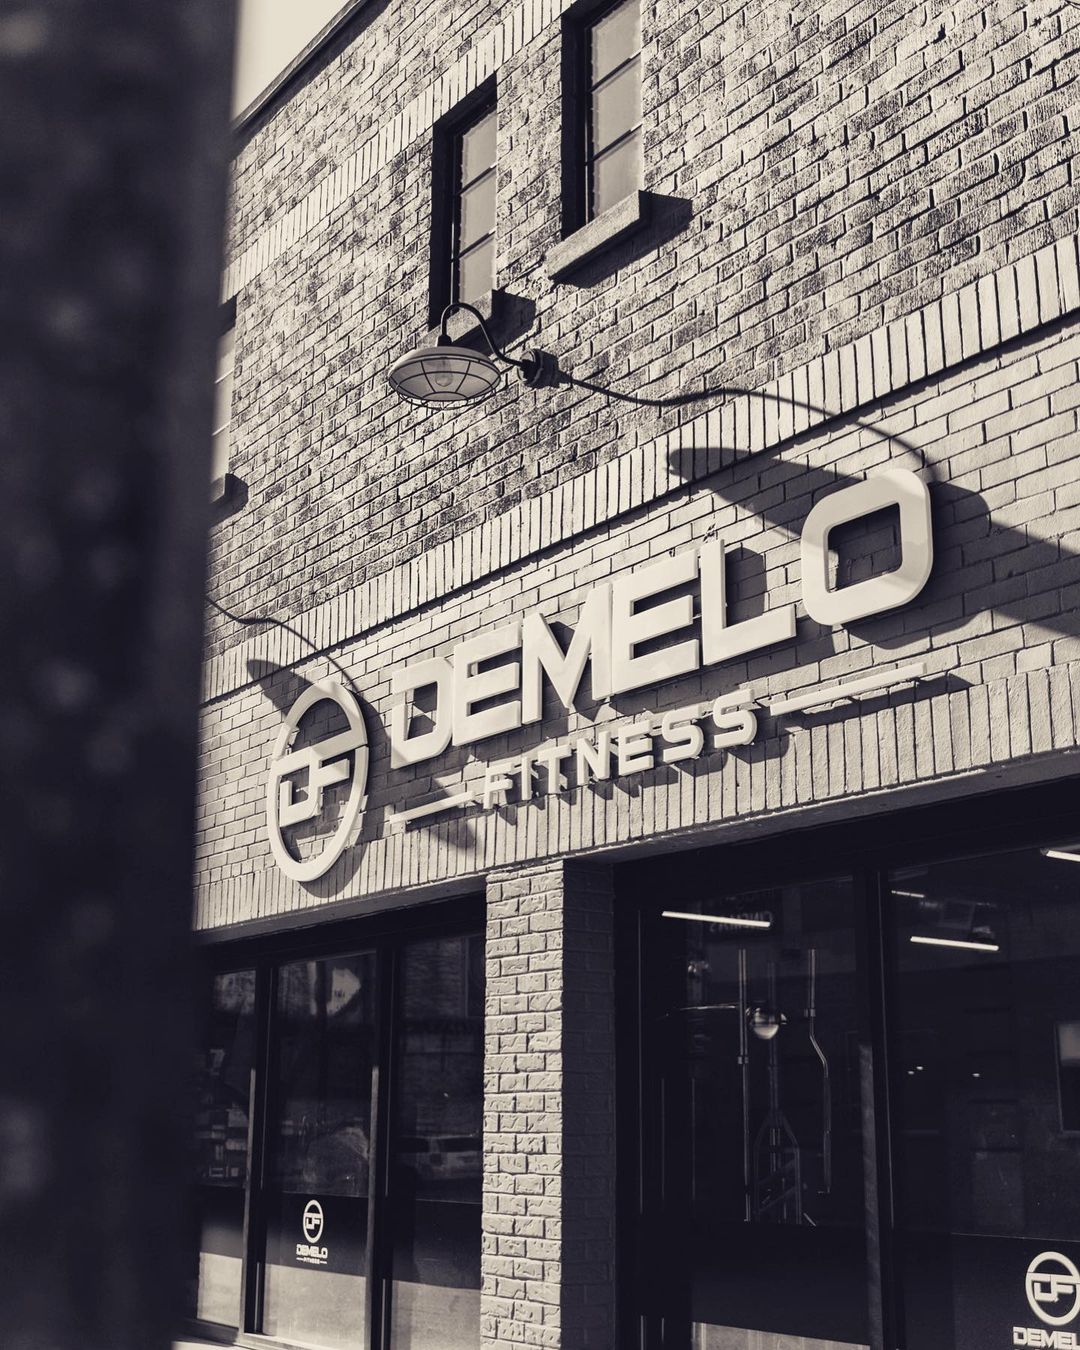 Exterior shot of the DeMelo Fitness gym. The photo is sepia toned showing the logo and brand name along the wall and in the corner of the windows